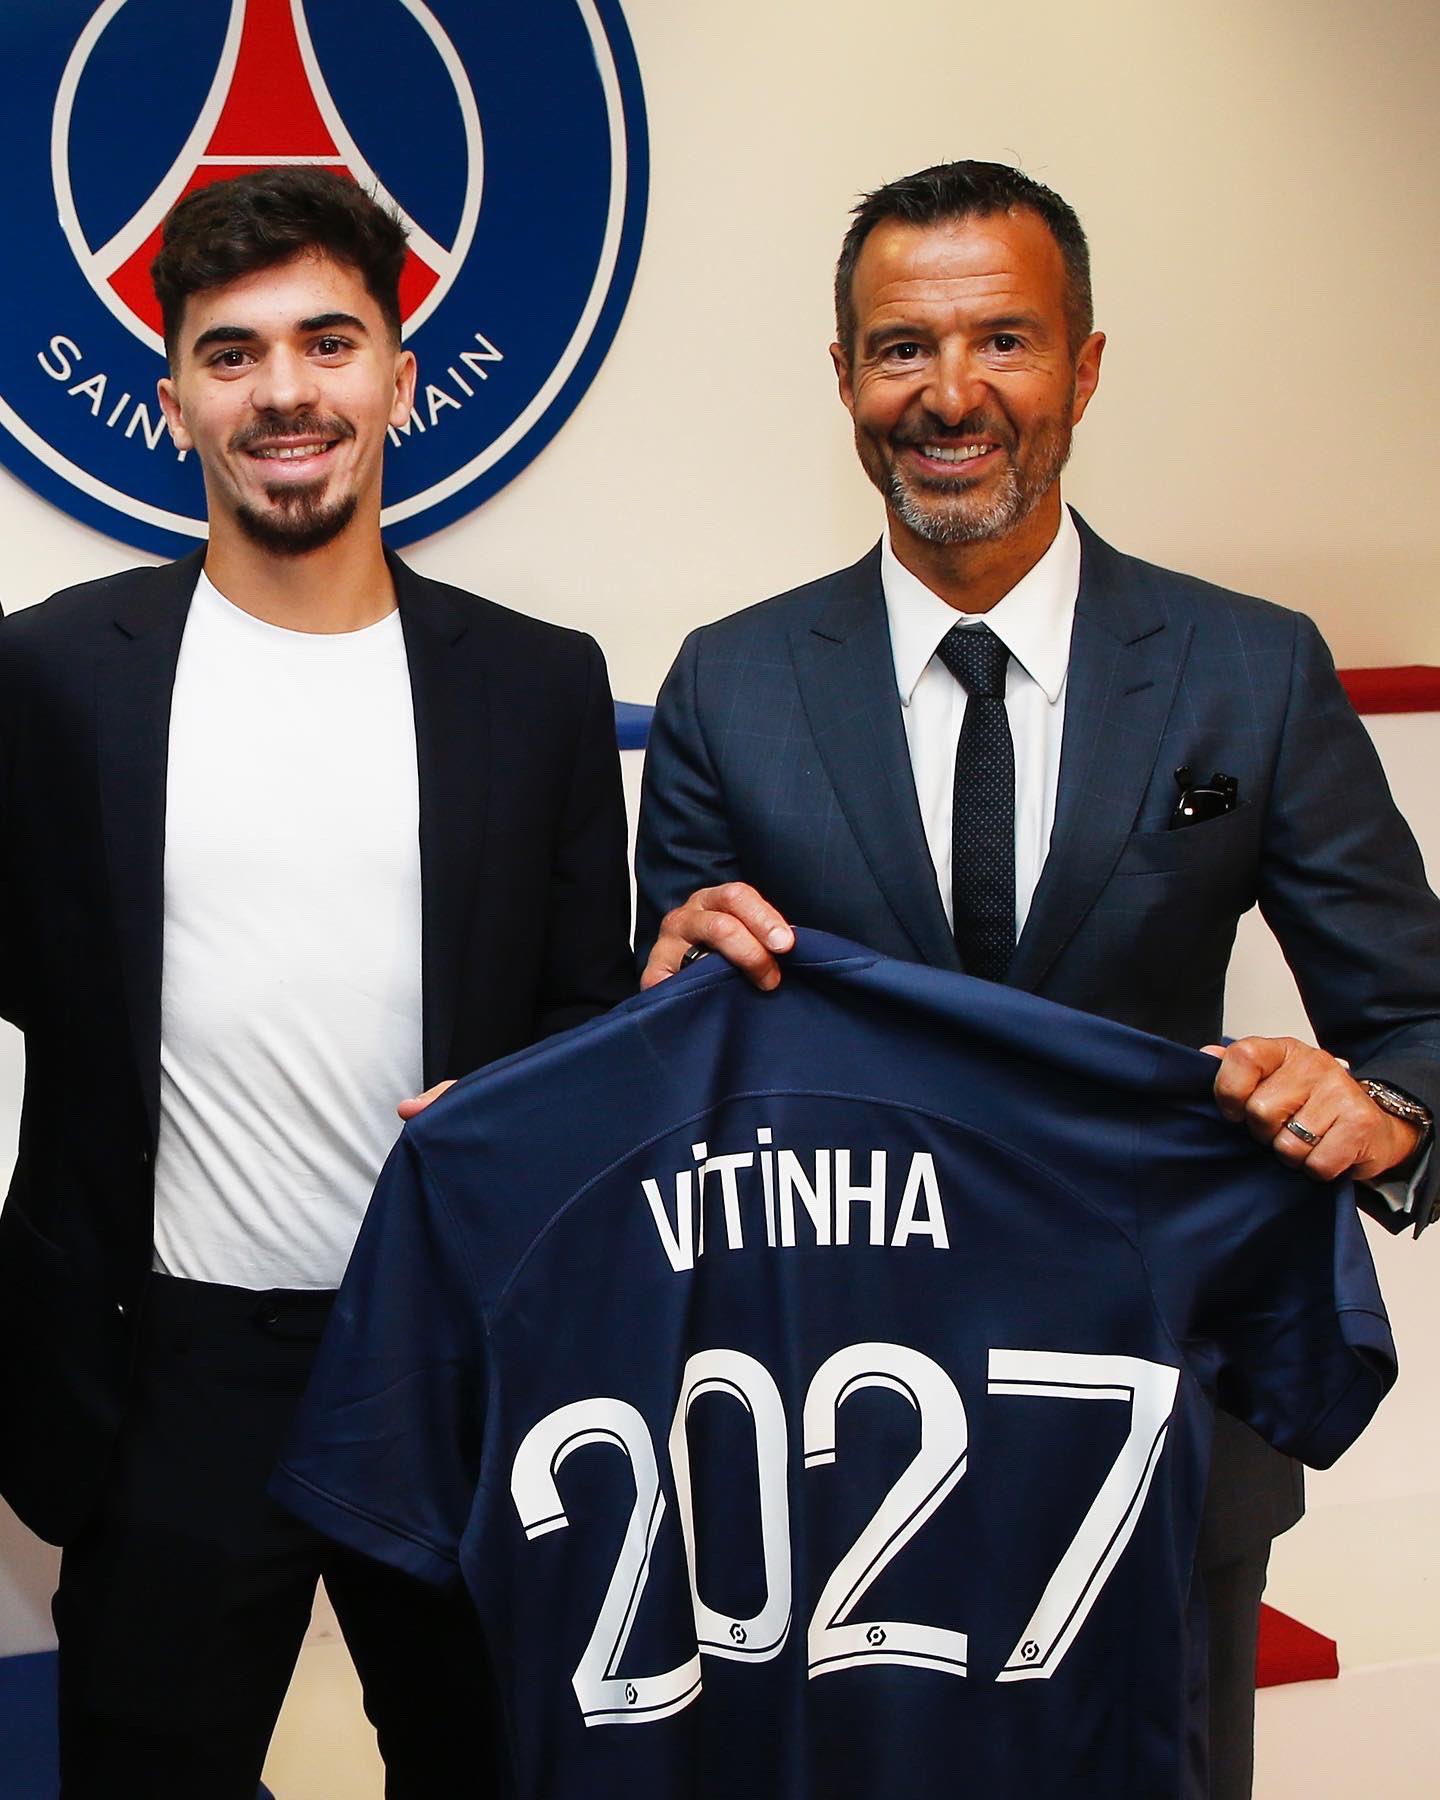 OFFICIAL PSG announces its first signing of 40 million euros